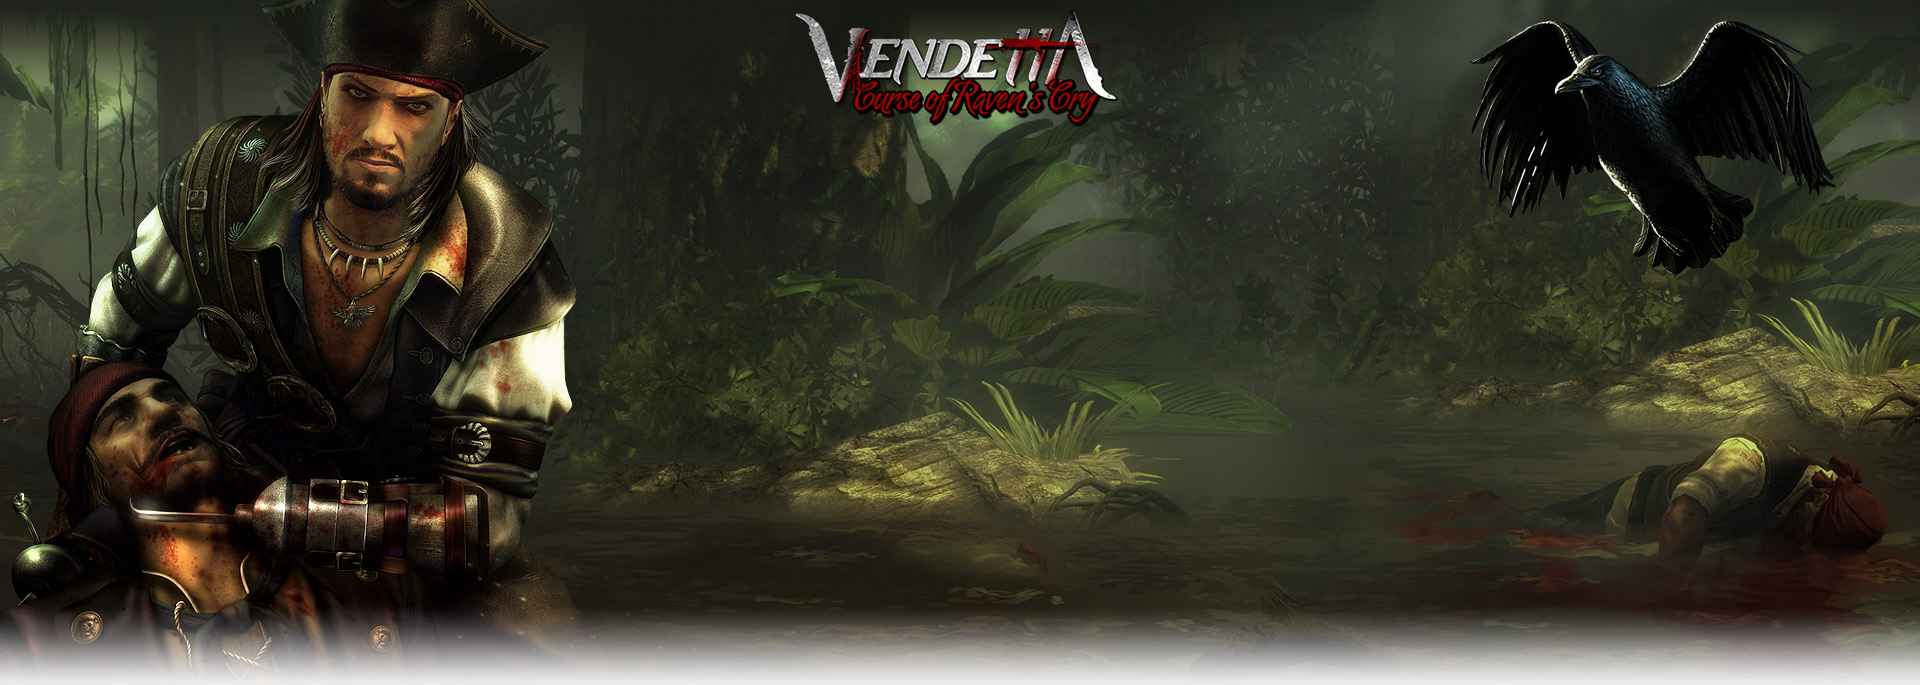 Vendetta - Curse of Raven's Cry Deluxe Edition Steam CD Key - background